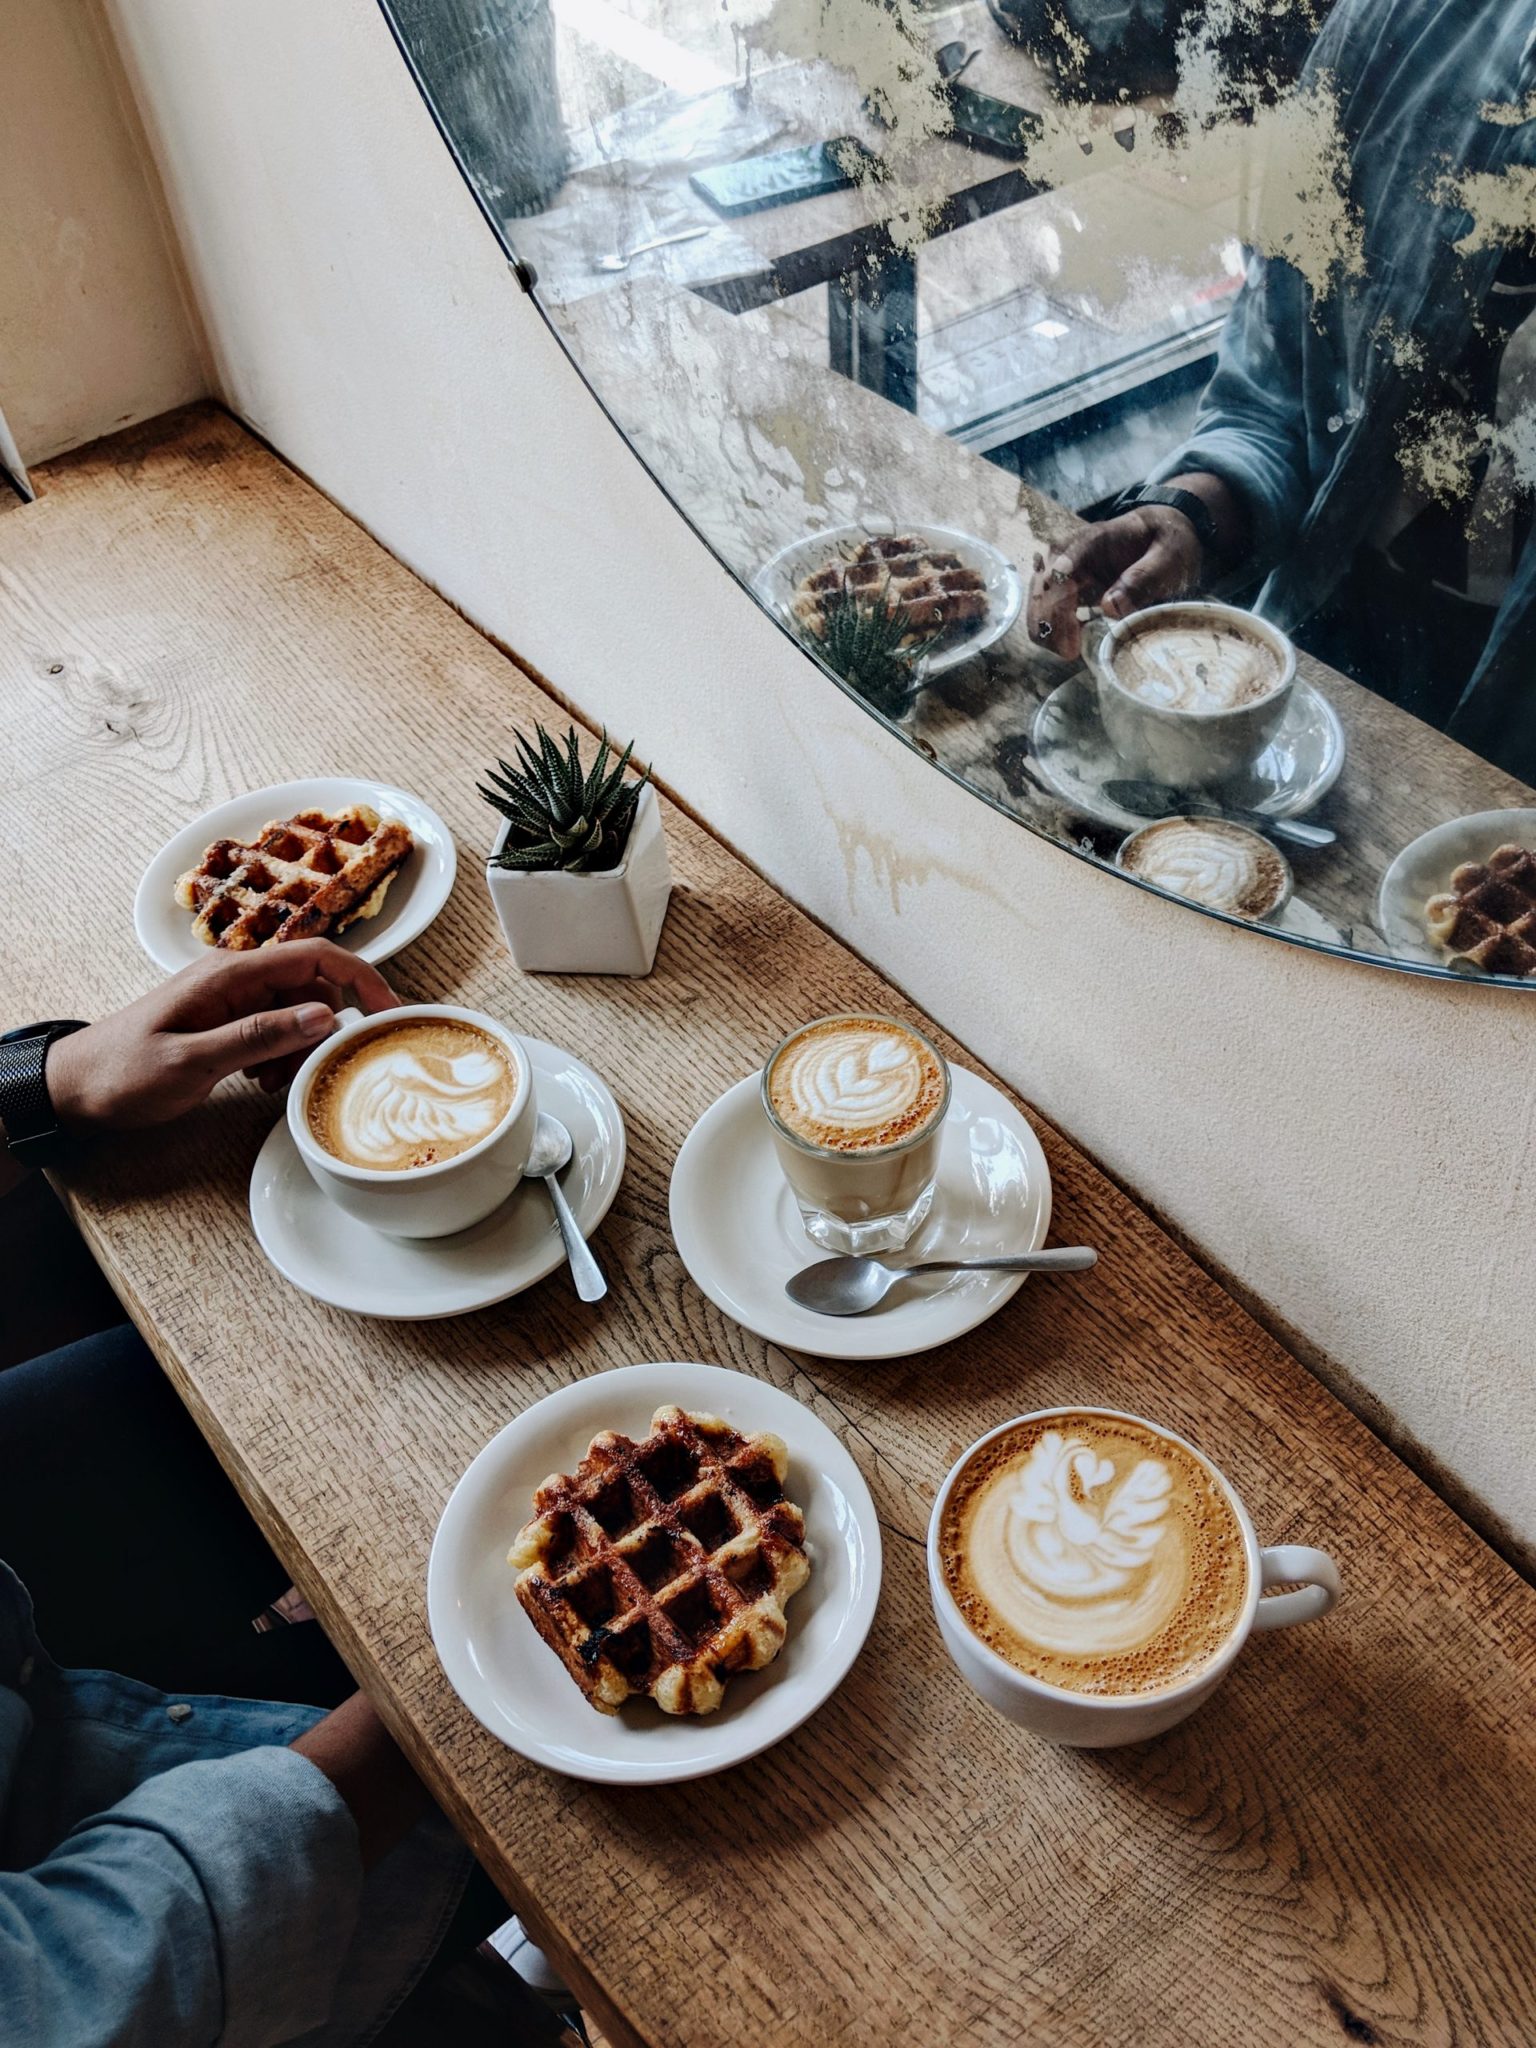 Boston Coffee Shops: 10 Spots You Must Visit - Heart for Wander